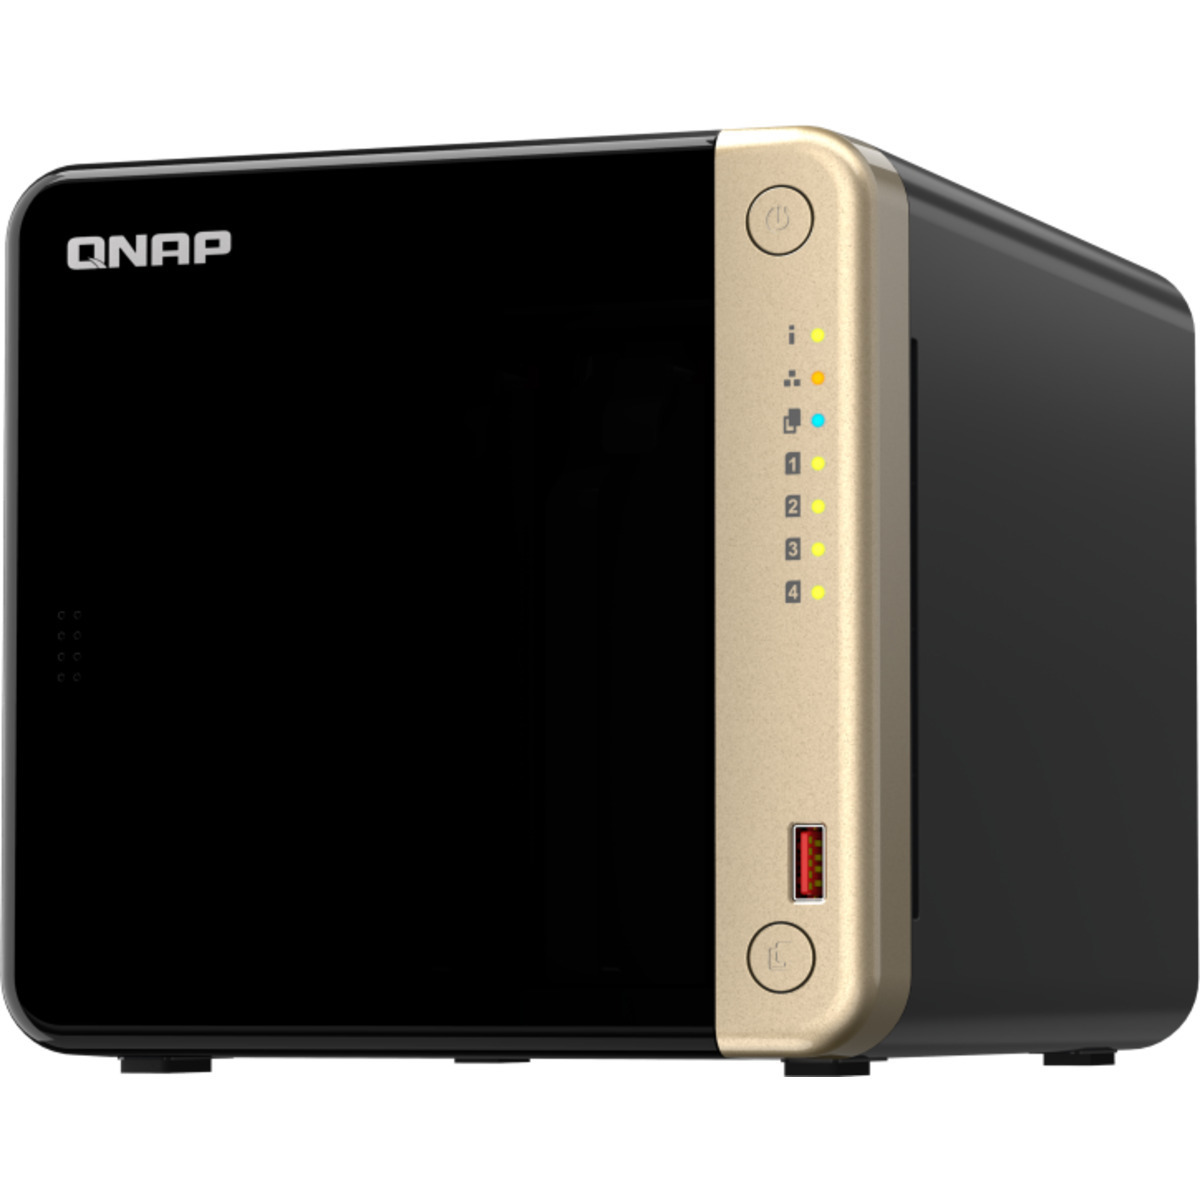 QNAP TS-464 8tb 4-Bay Desktop Multimedia / Power User / Business NAS - Network Attached Storage Device 4x2tb Sandisk Ultra 3D SDSSDH3-2T00 2.5 560/520MB/s SATA 6Gb/s SSD CONSUMER Class Drives Installed - Burn-In Tested TS-464